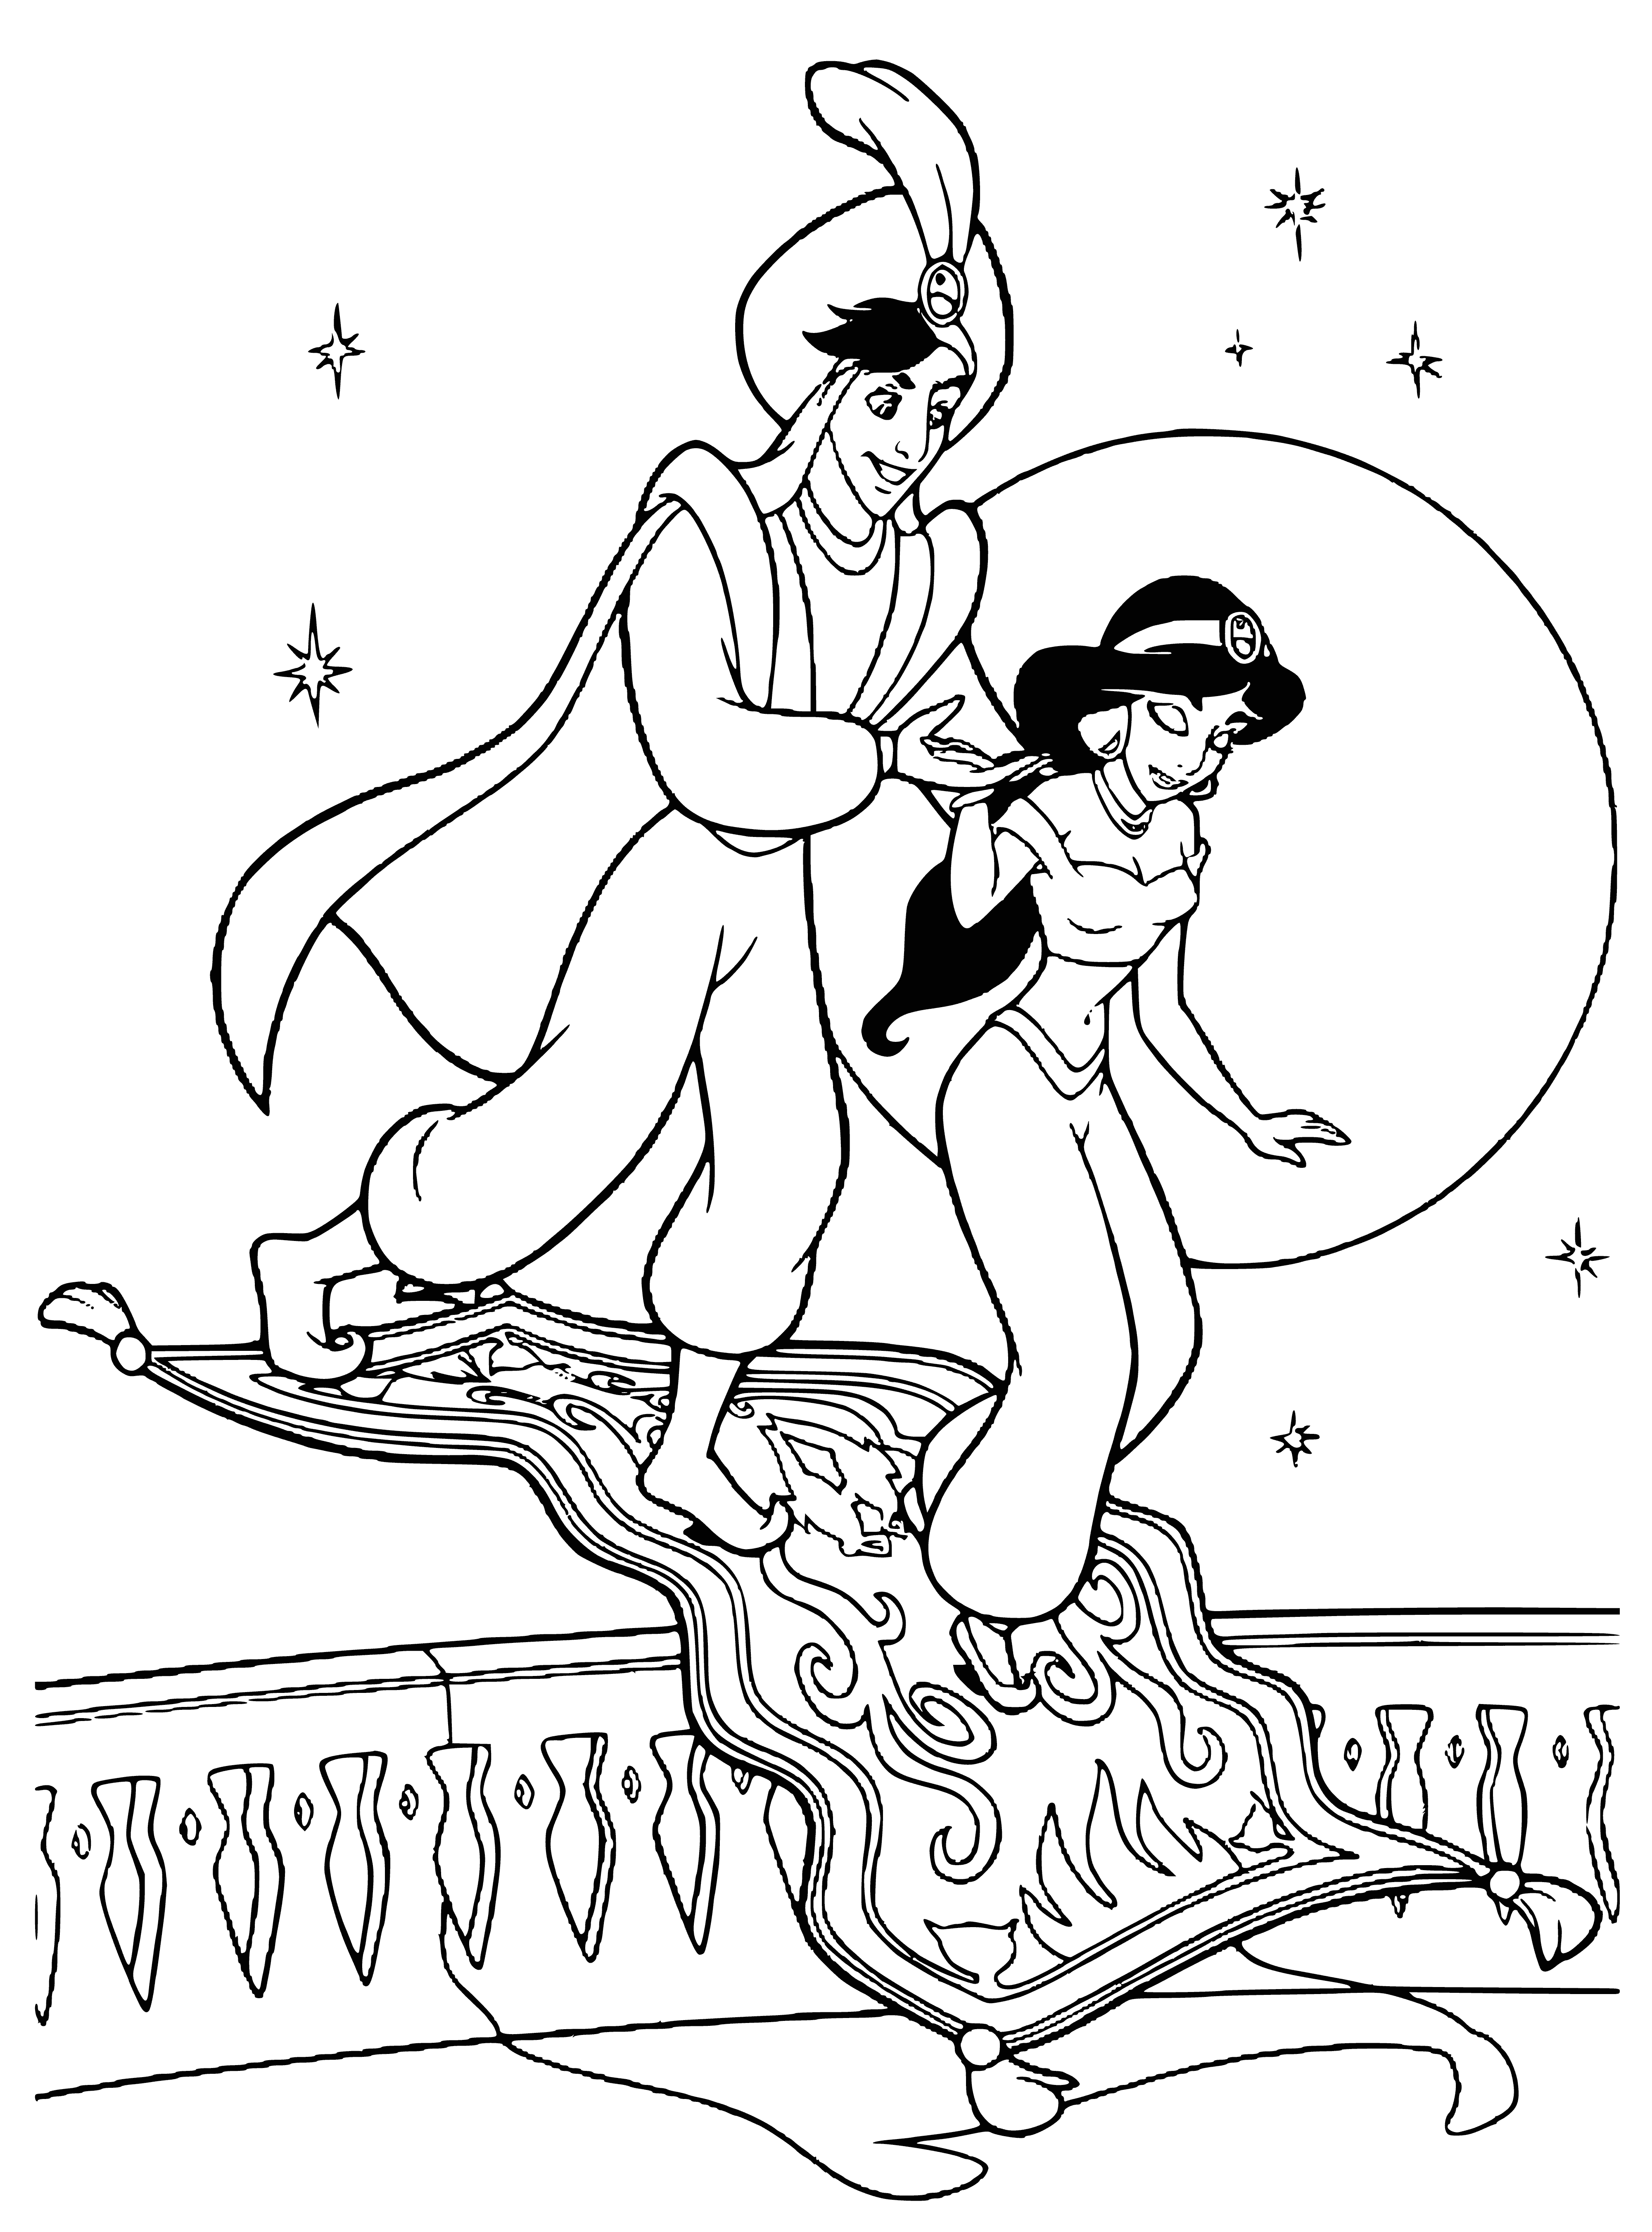 coloring page: Boy and monkey fly on levitating carpet over city at night as stars twinkle in the sky.